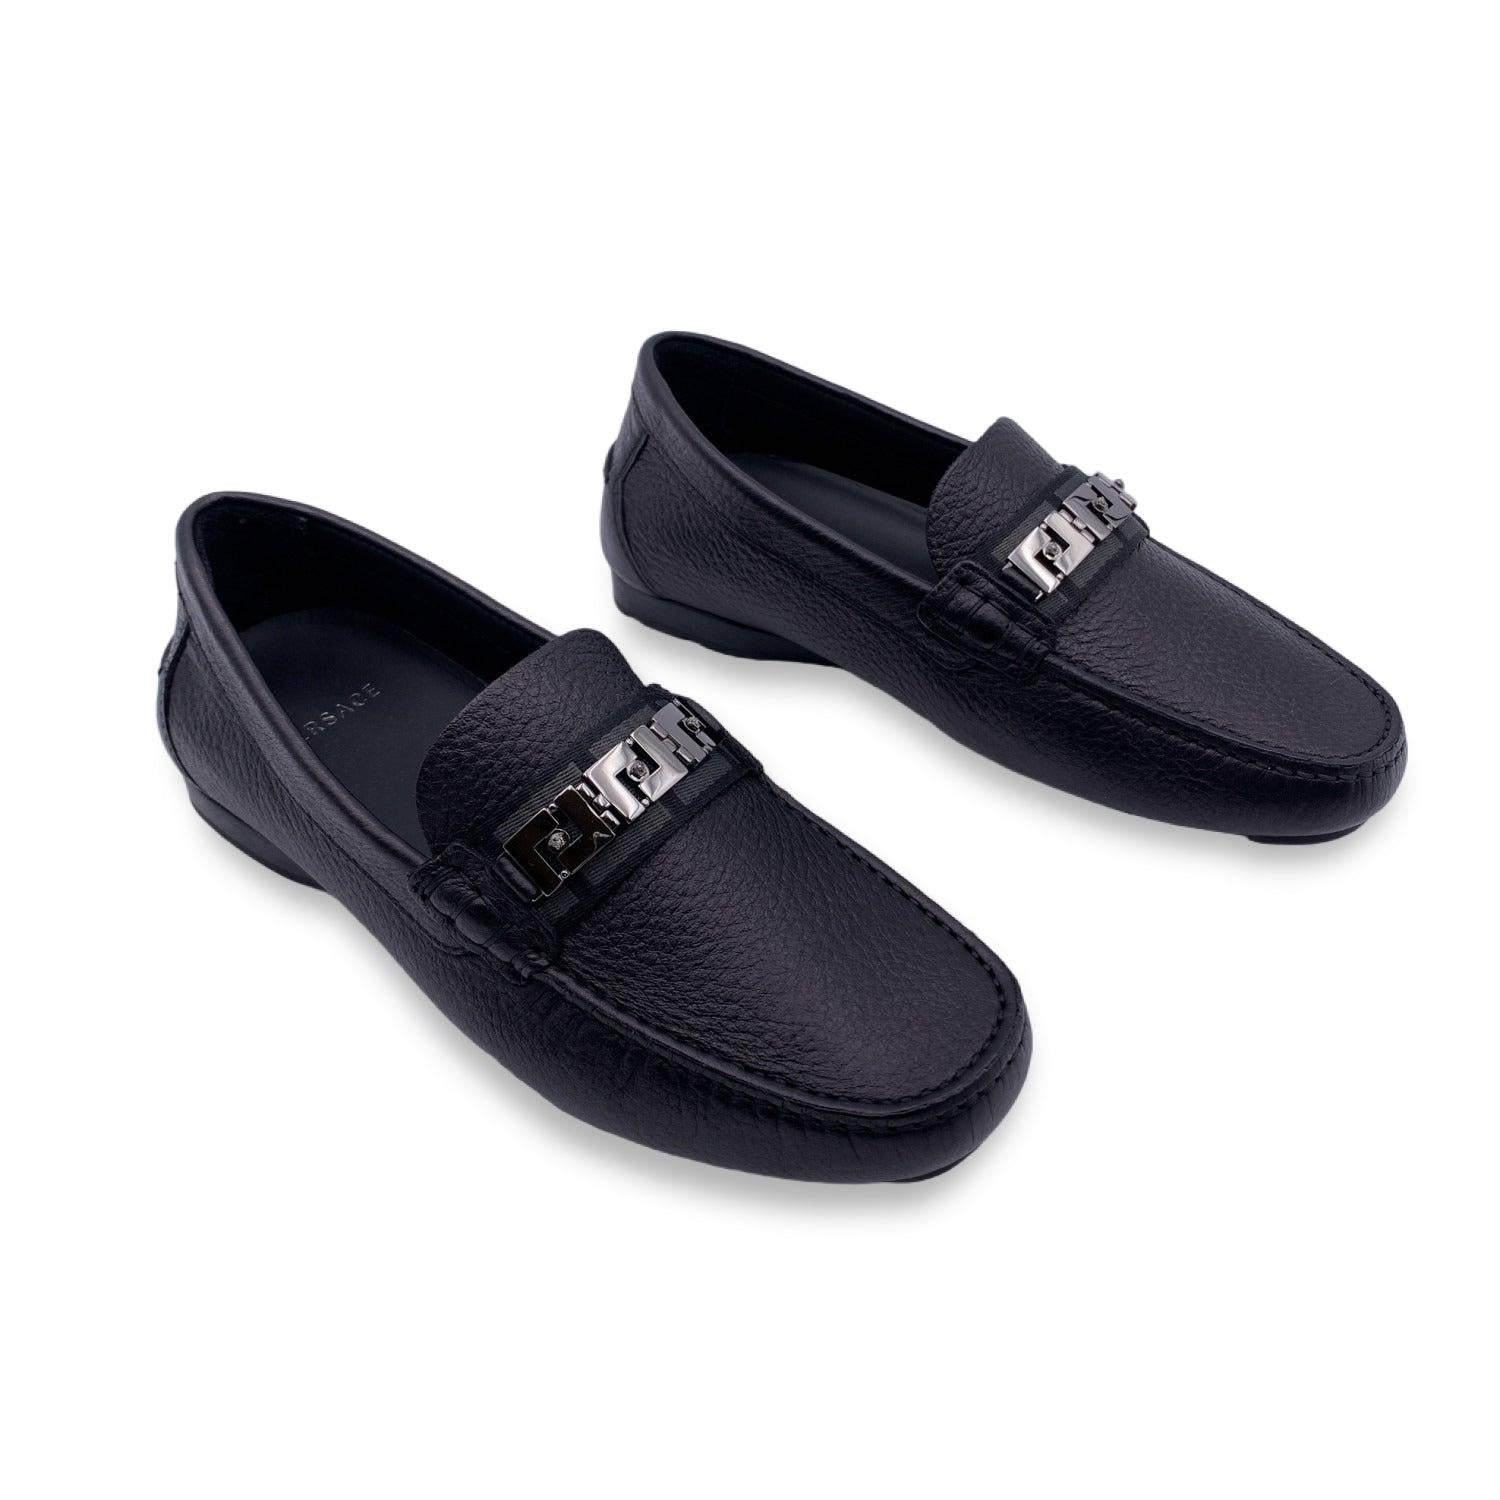 Versace Black Leather Mocassins Loafers Car Flat Shoes Size 38.5 In Excellent Condition For Sale In Rome, Rome